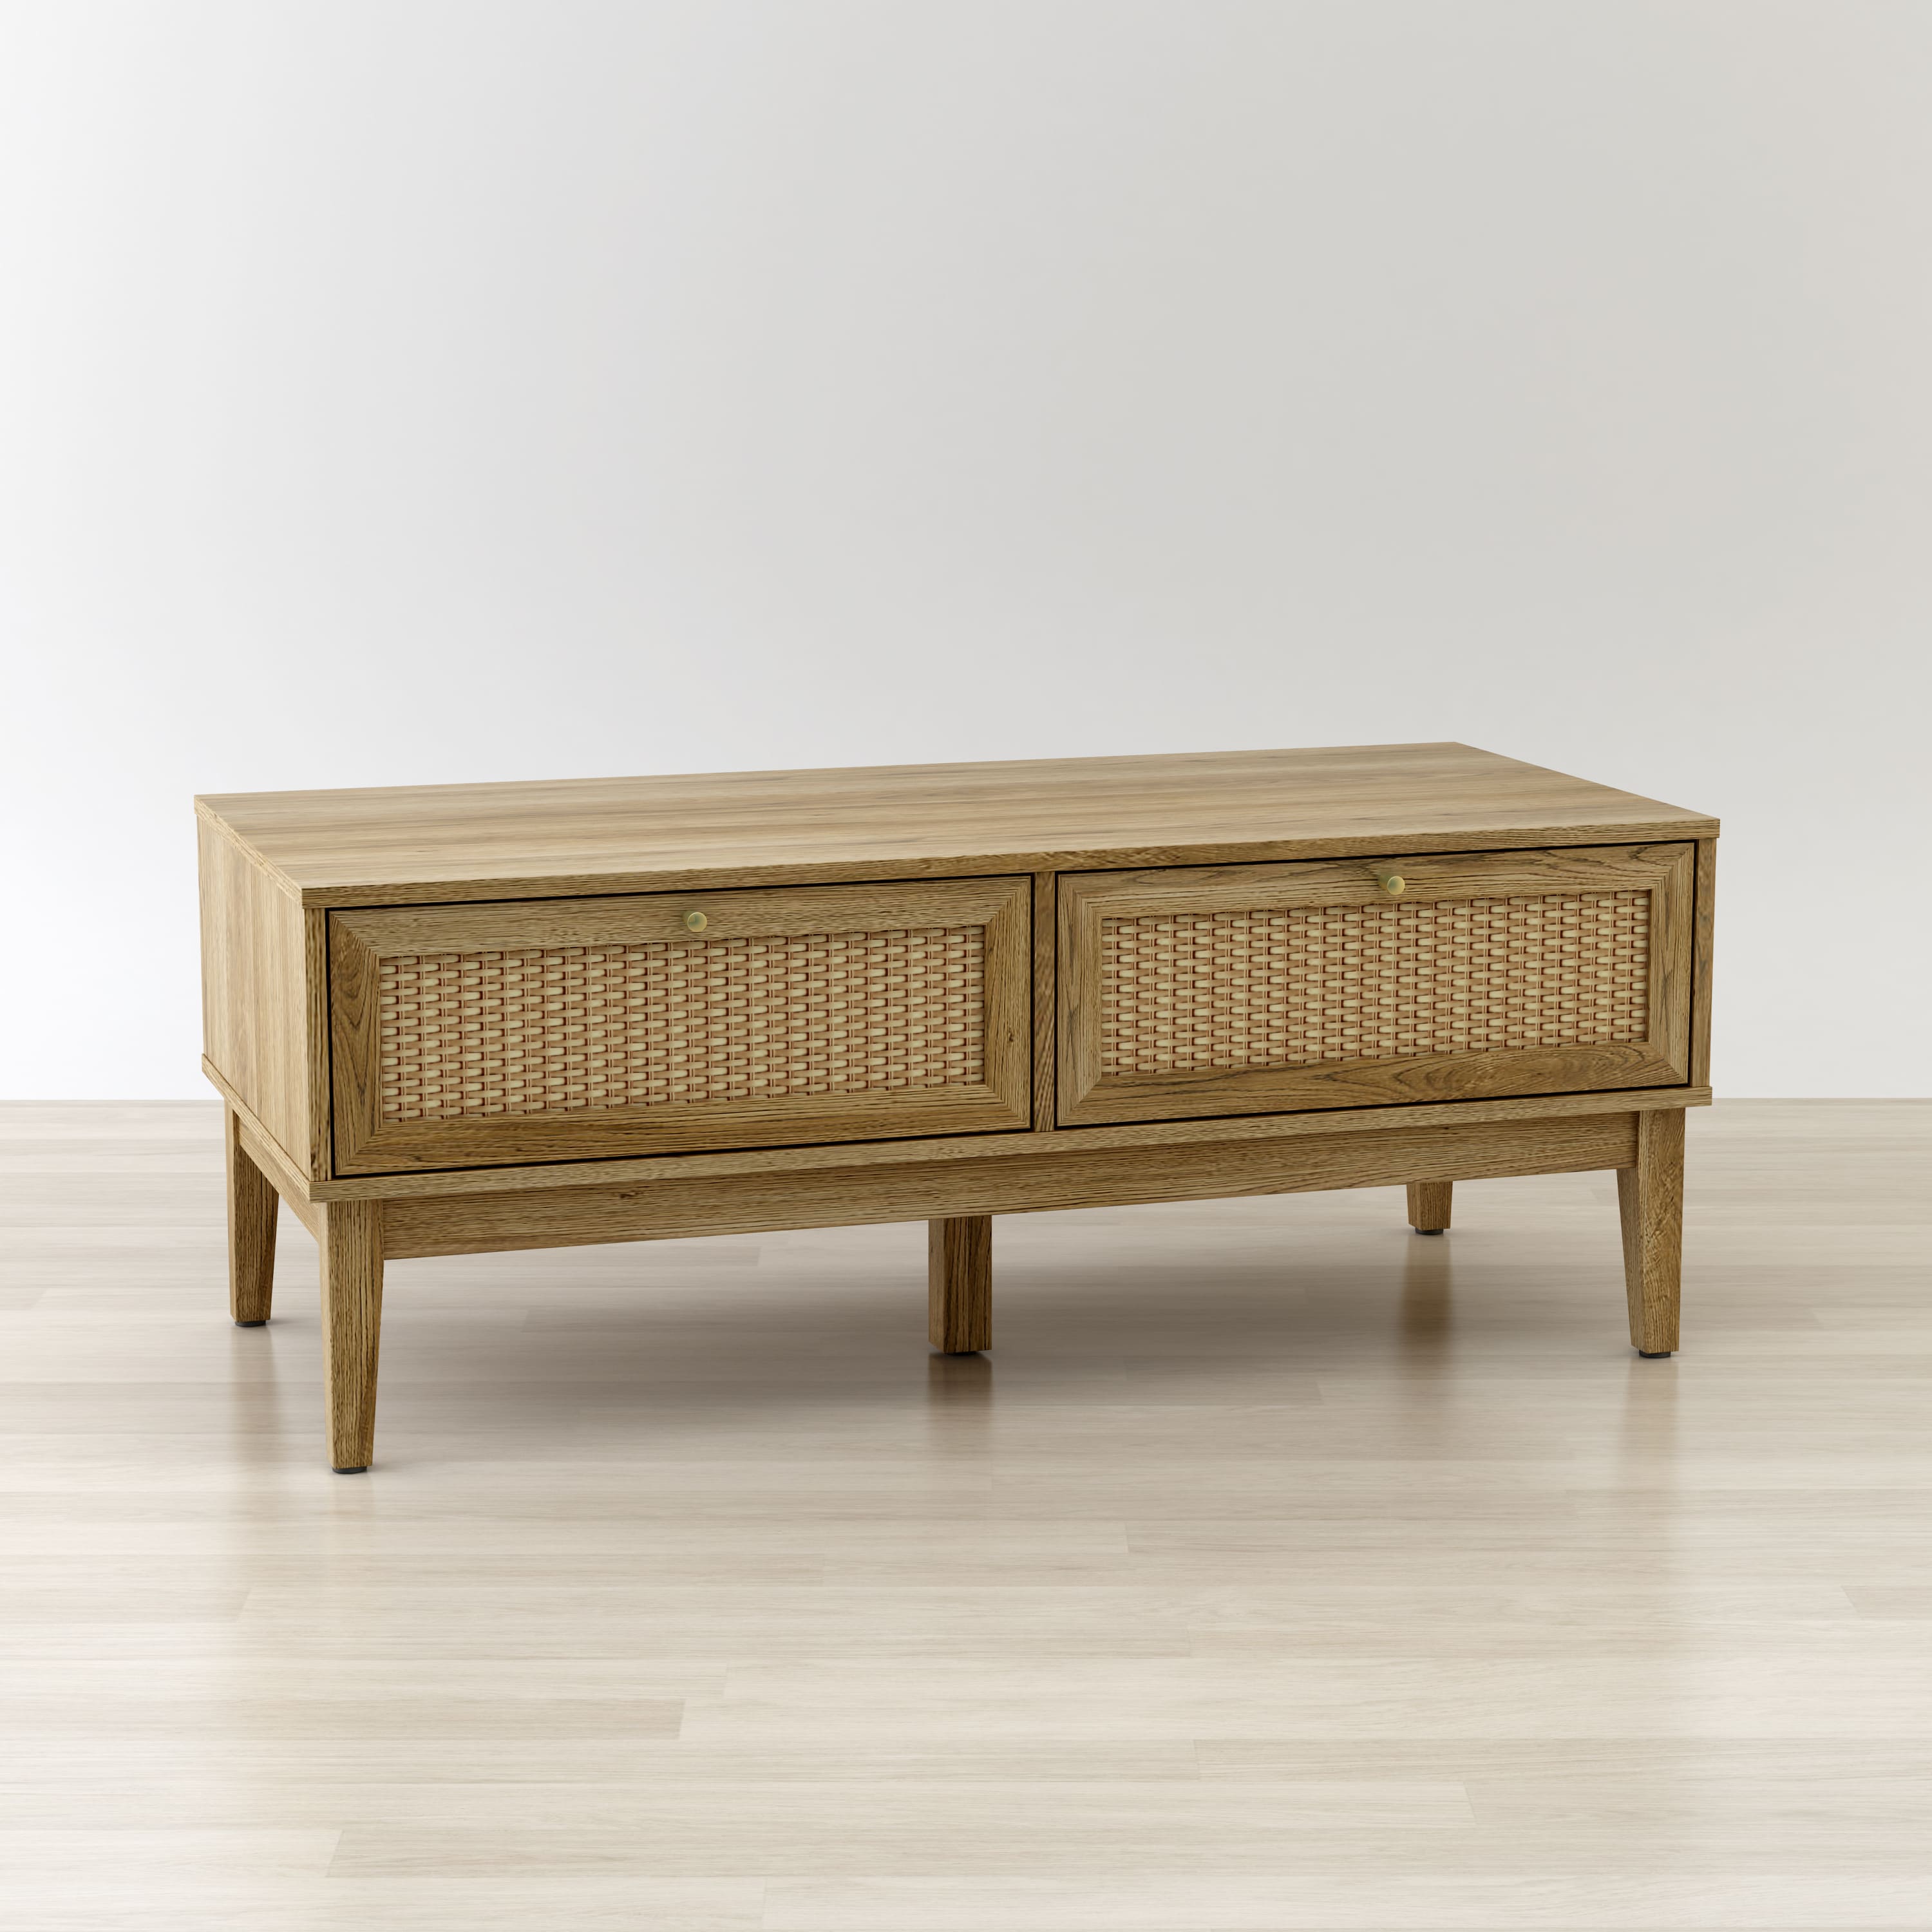 Anderson teak contemporary wood coffee table